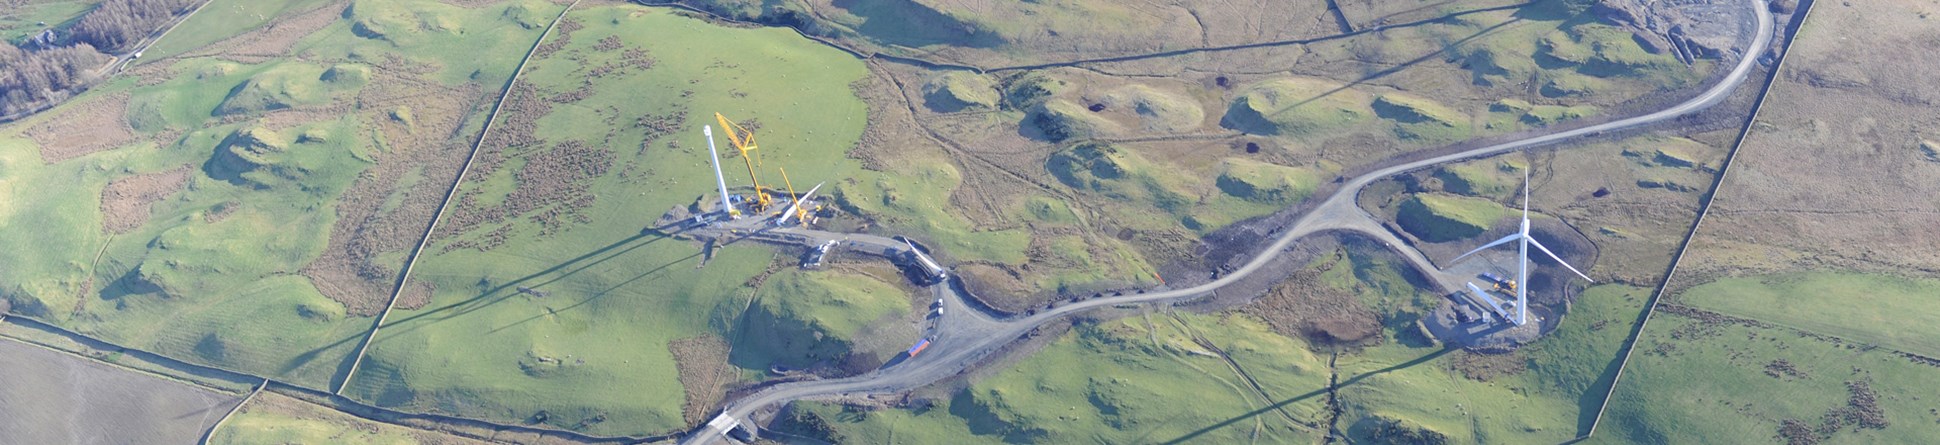 Colour aerial photograph showing one complete wind turbine and one under construction with the cranes and construction road